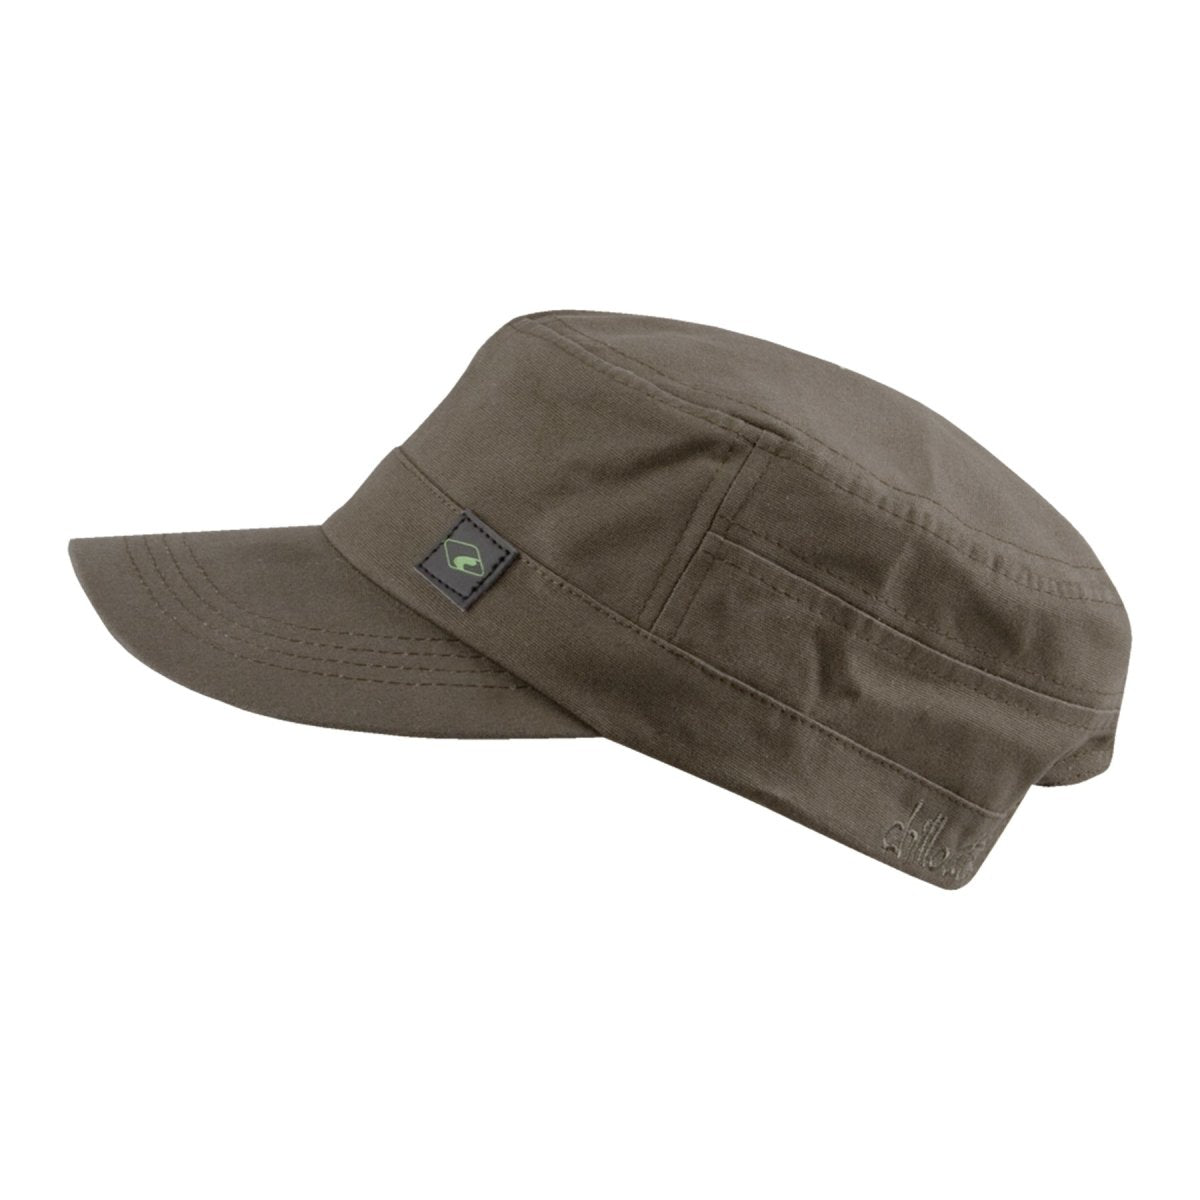 Military cap buy Headwear now! made colors in natural of cotton – Chillouts - online